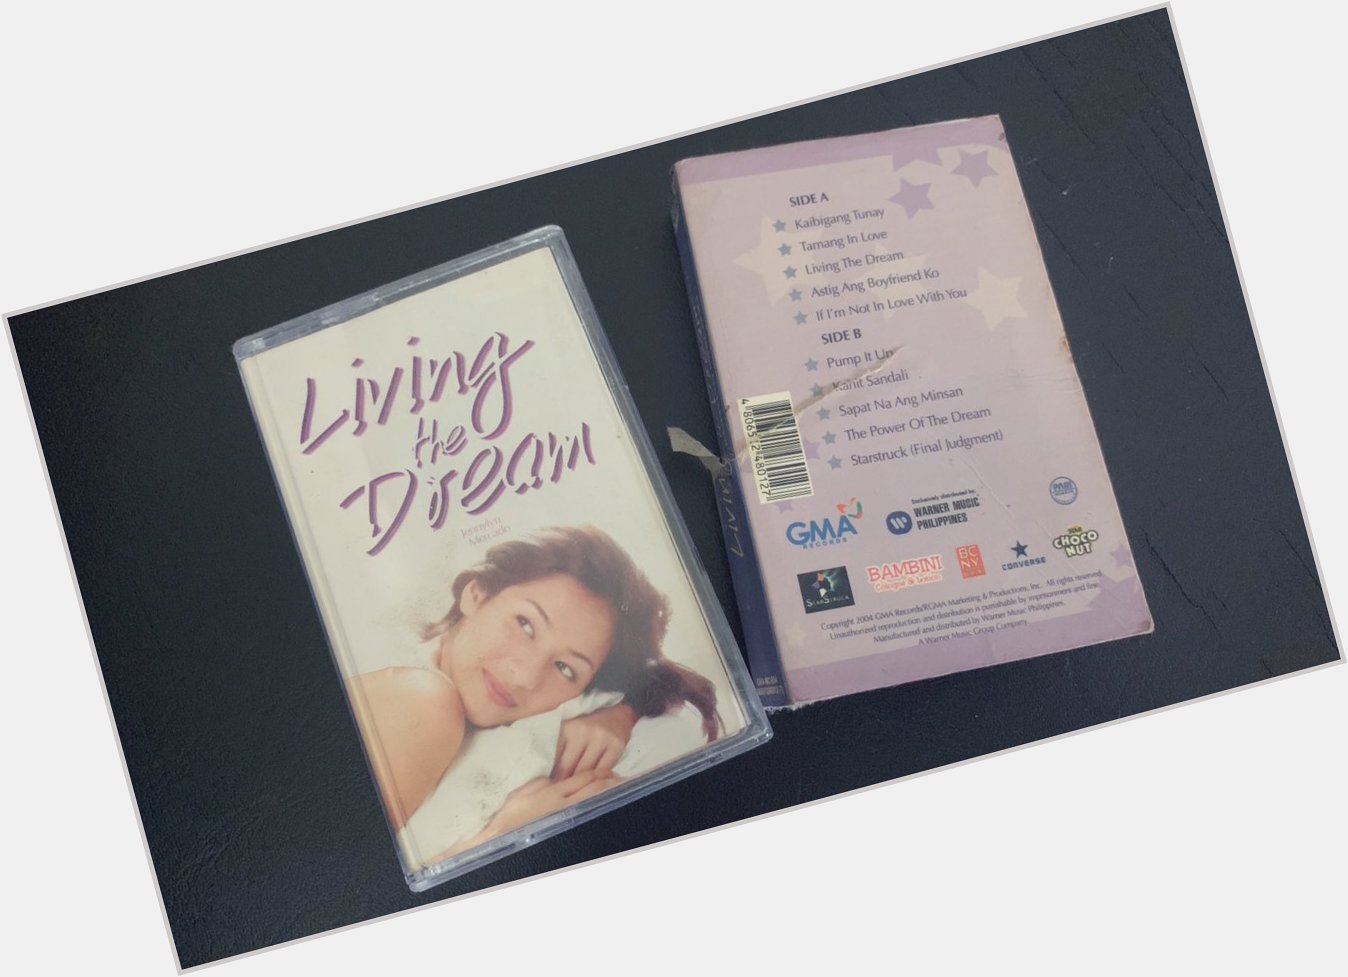 Found my living the dream cassette tape from my old stuff. lol. 

happy birthday   